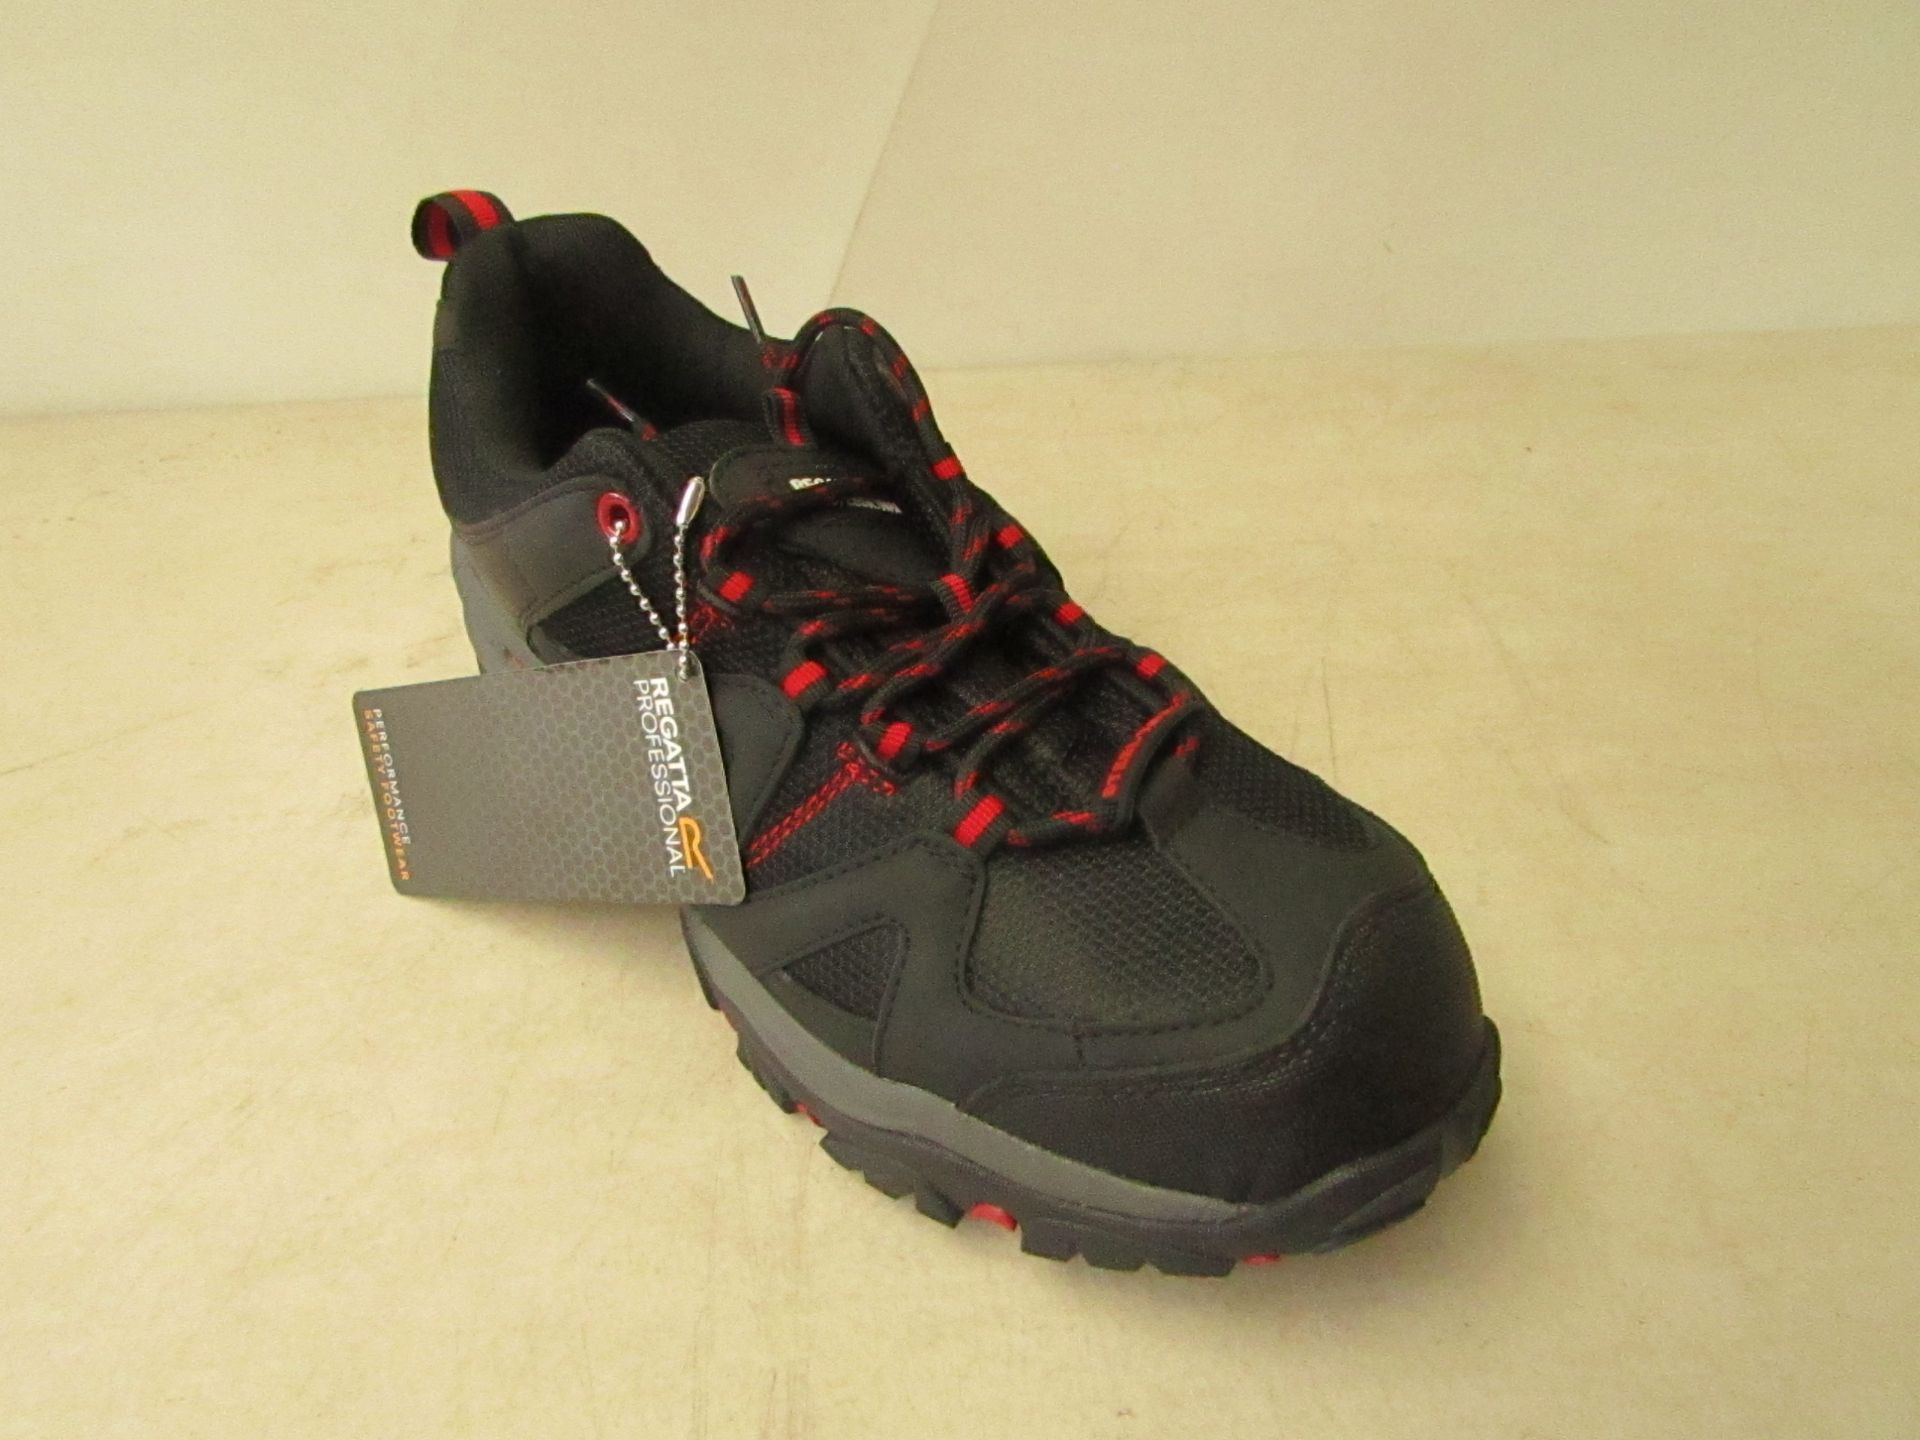 Regatta Professional Riverback safety trainers, black and red colour, size 10, new and boxed.